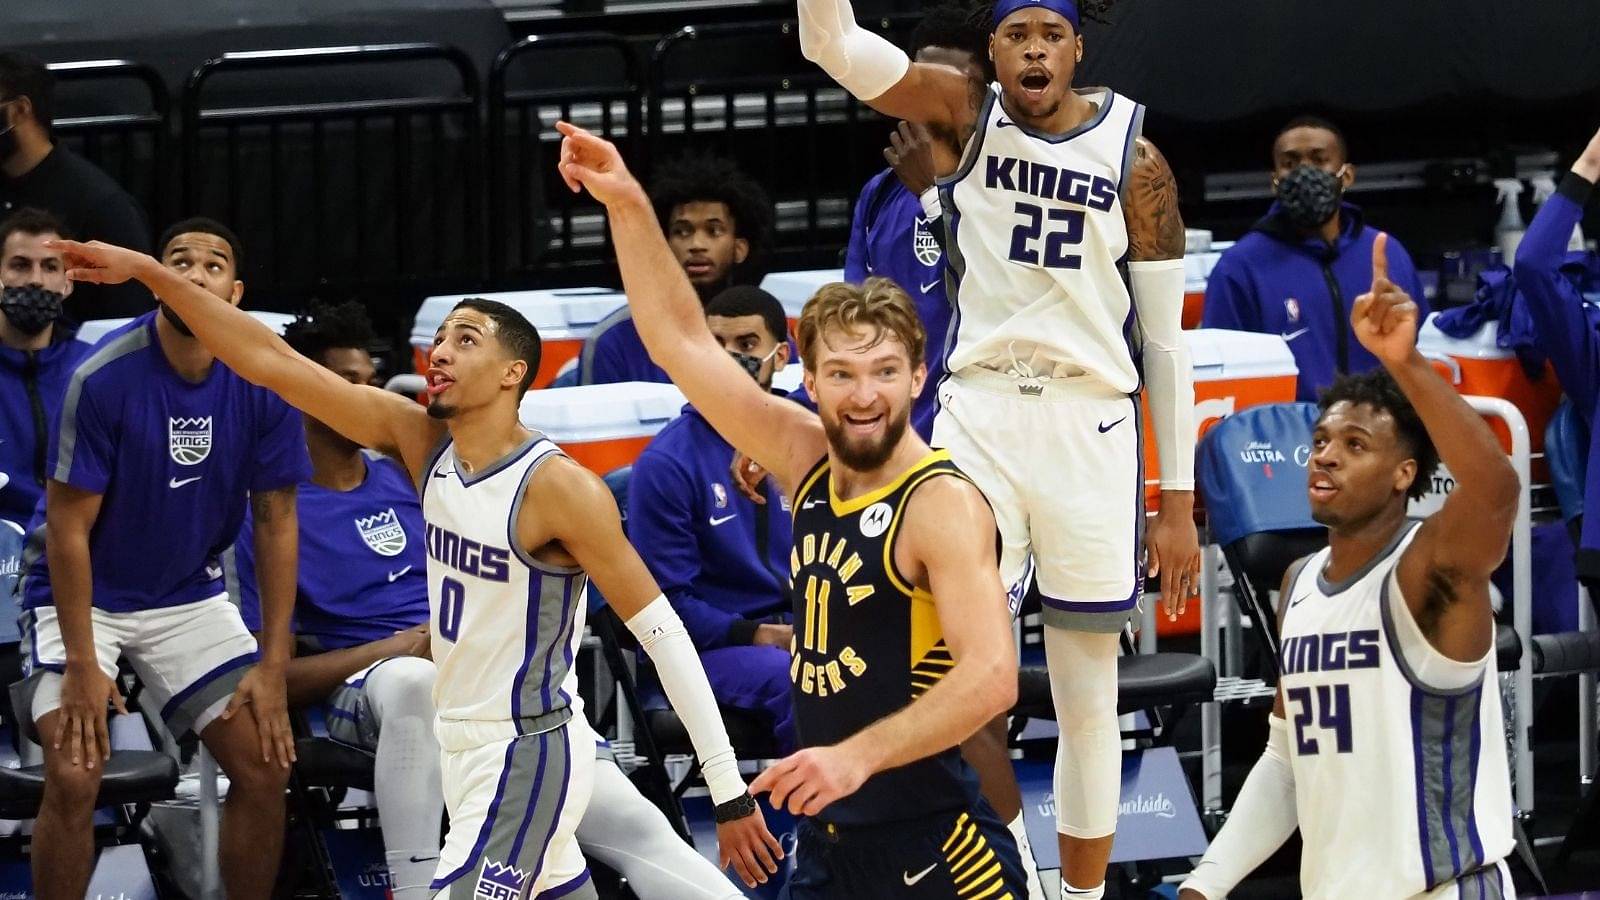 "Trading Tyrese Haliburton is some form of malpractice on the Kings part..": Experts and fans including JJ Redick in shock as Sacramento makes a trade for Domantas Sabonis